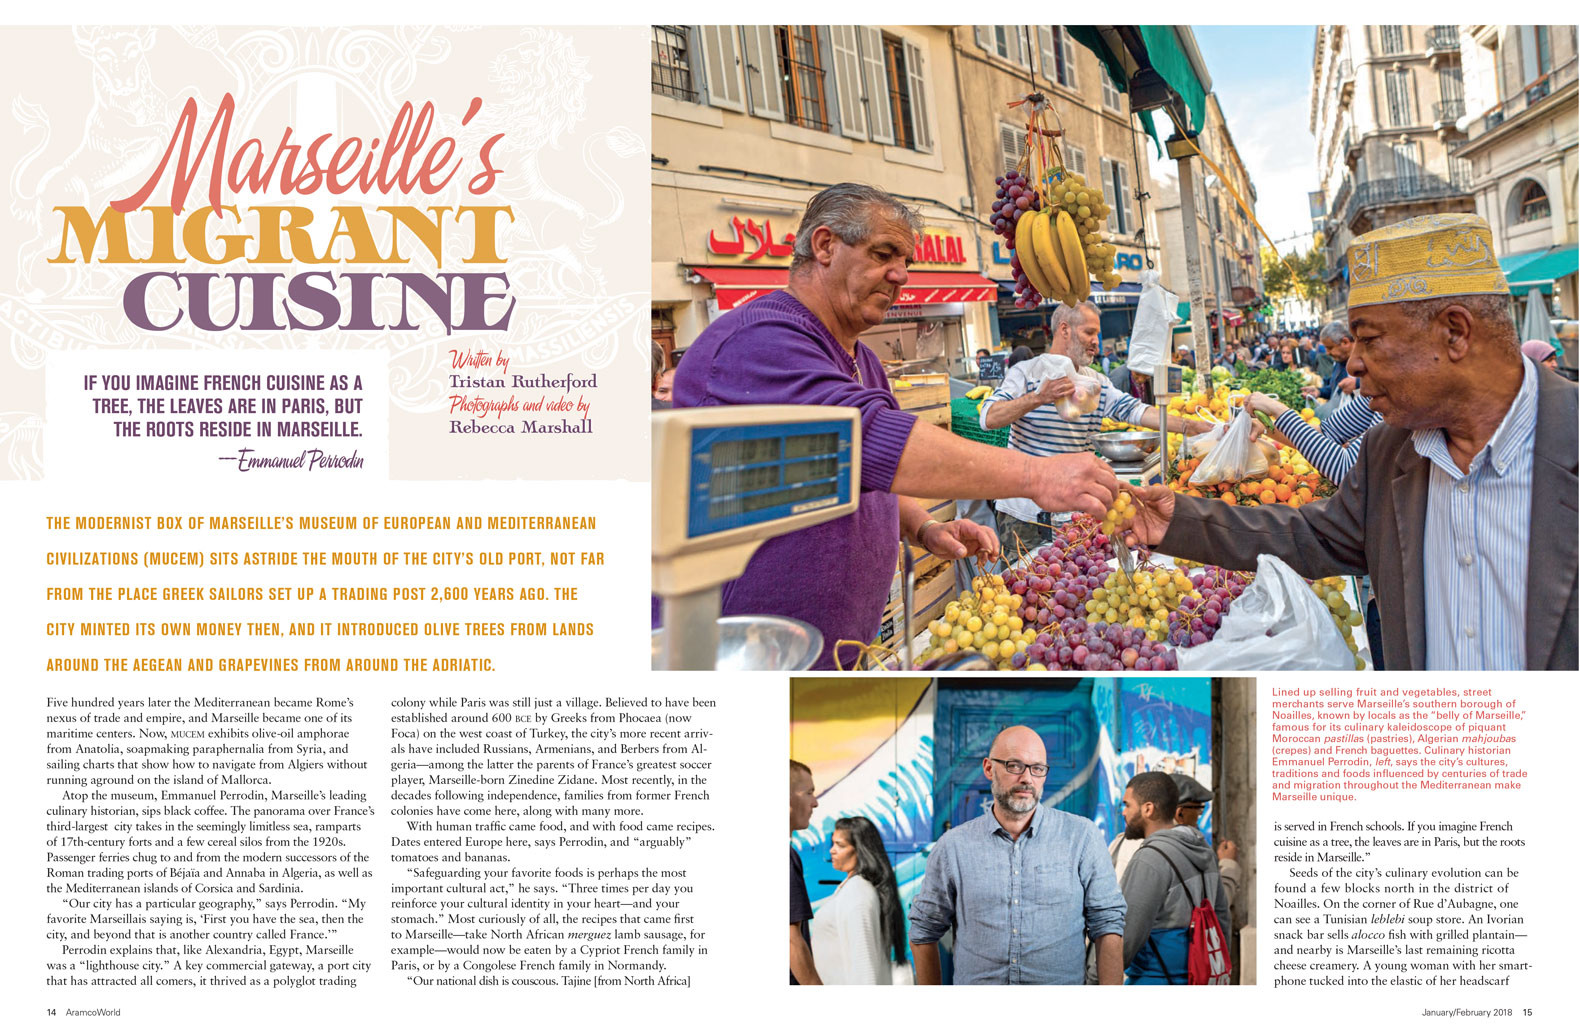 Leading double page layout of article in Aramco World magazine, showing photographs of a food market in Marseille, a portrait, and text